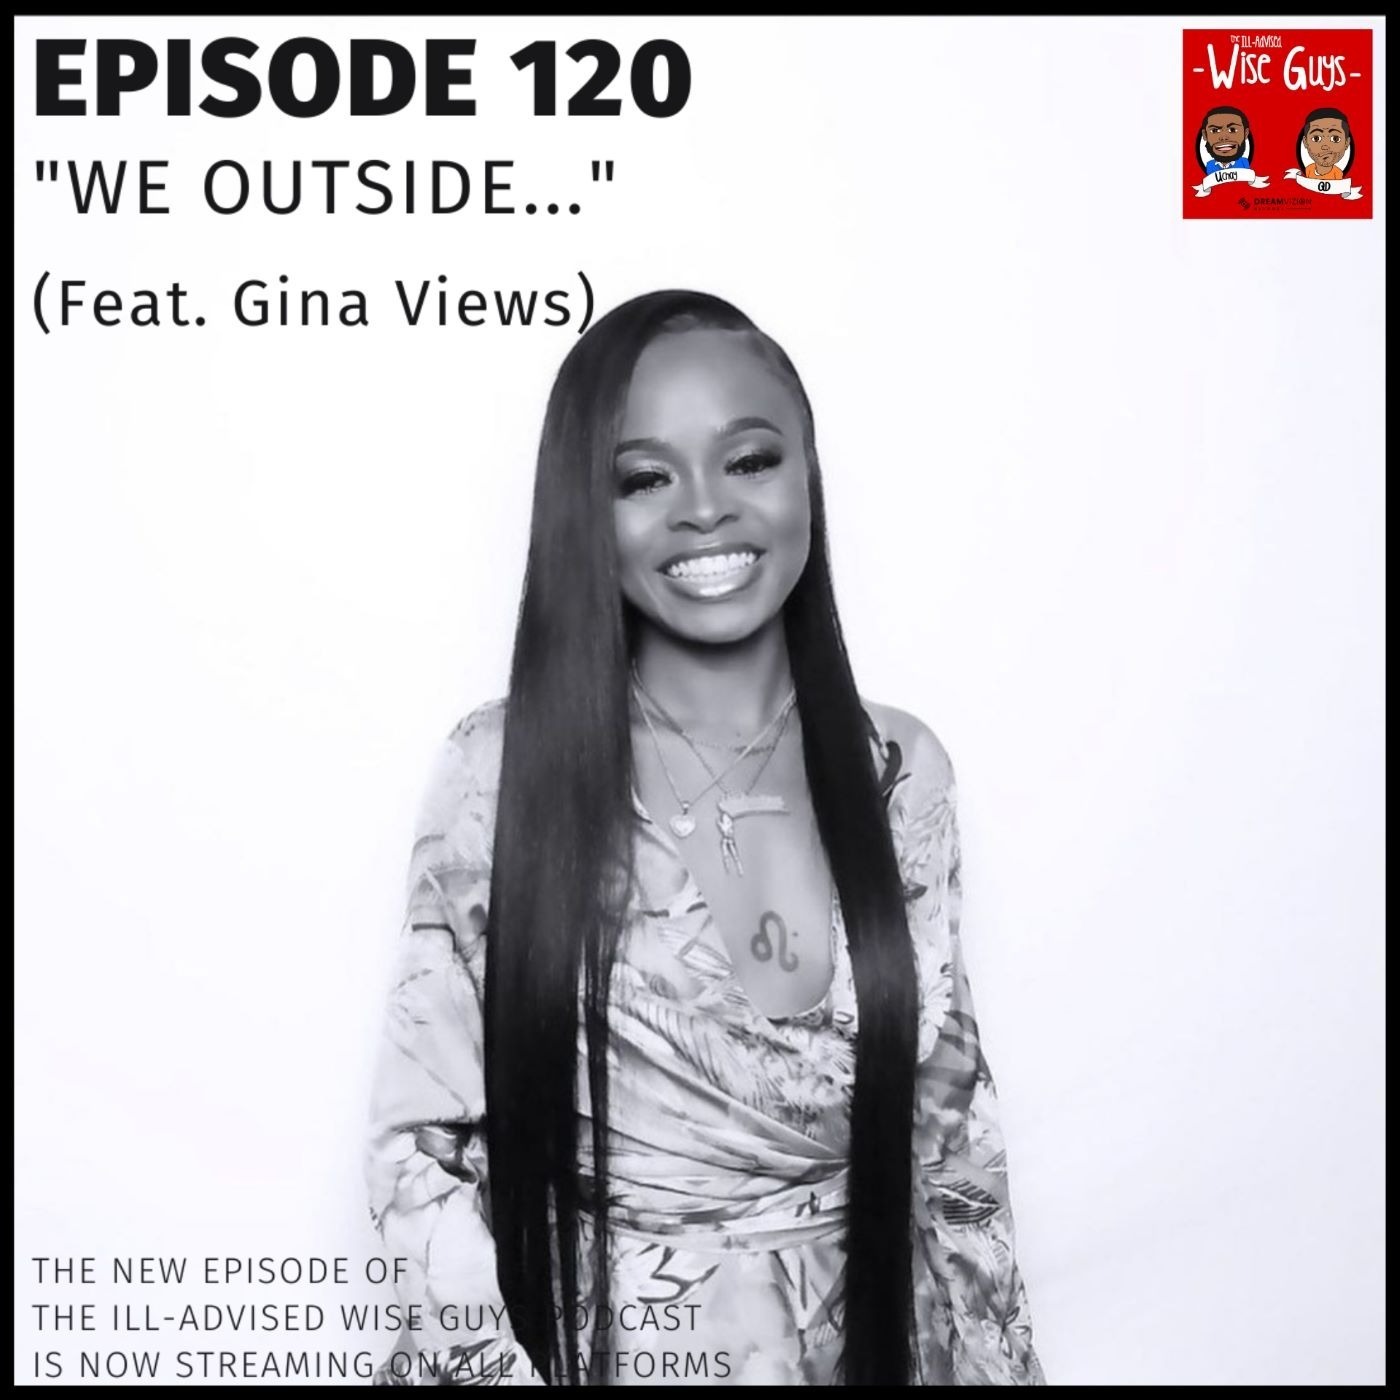 Episode 120 - "We Outside..." (Feat. Gina Views)